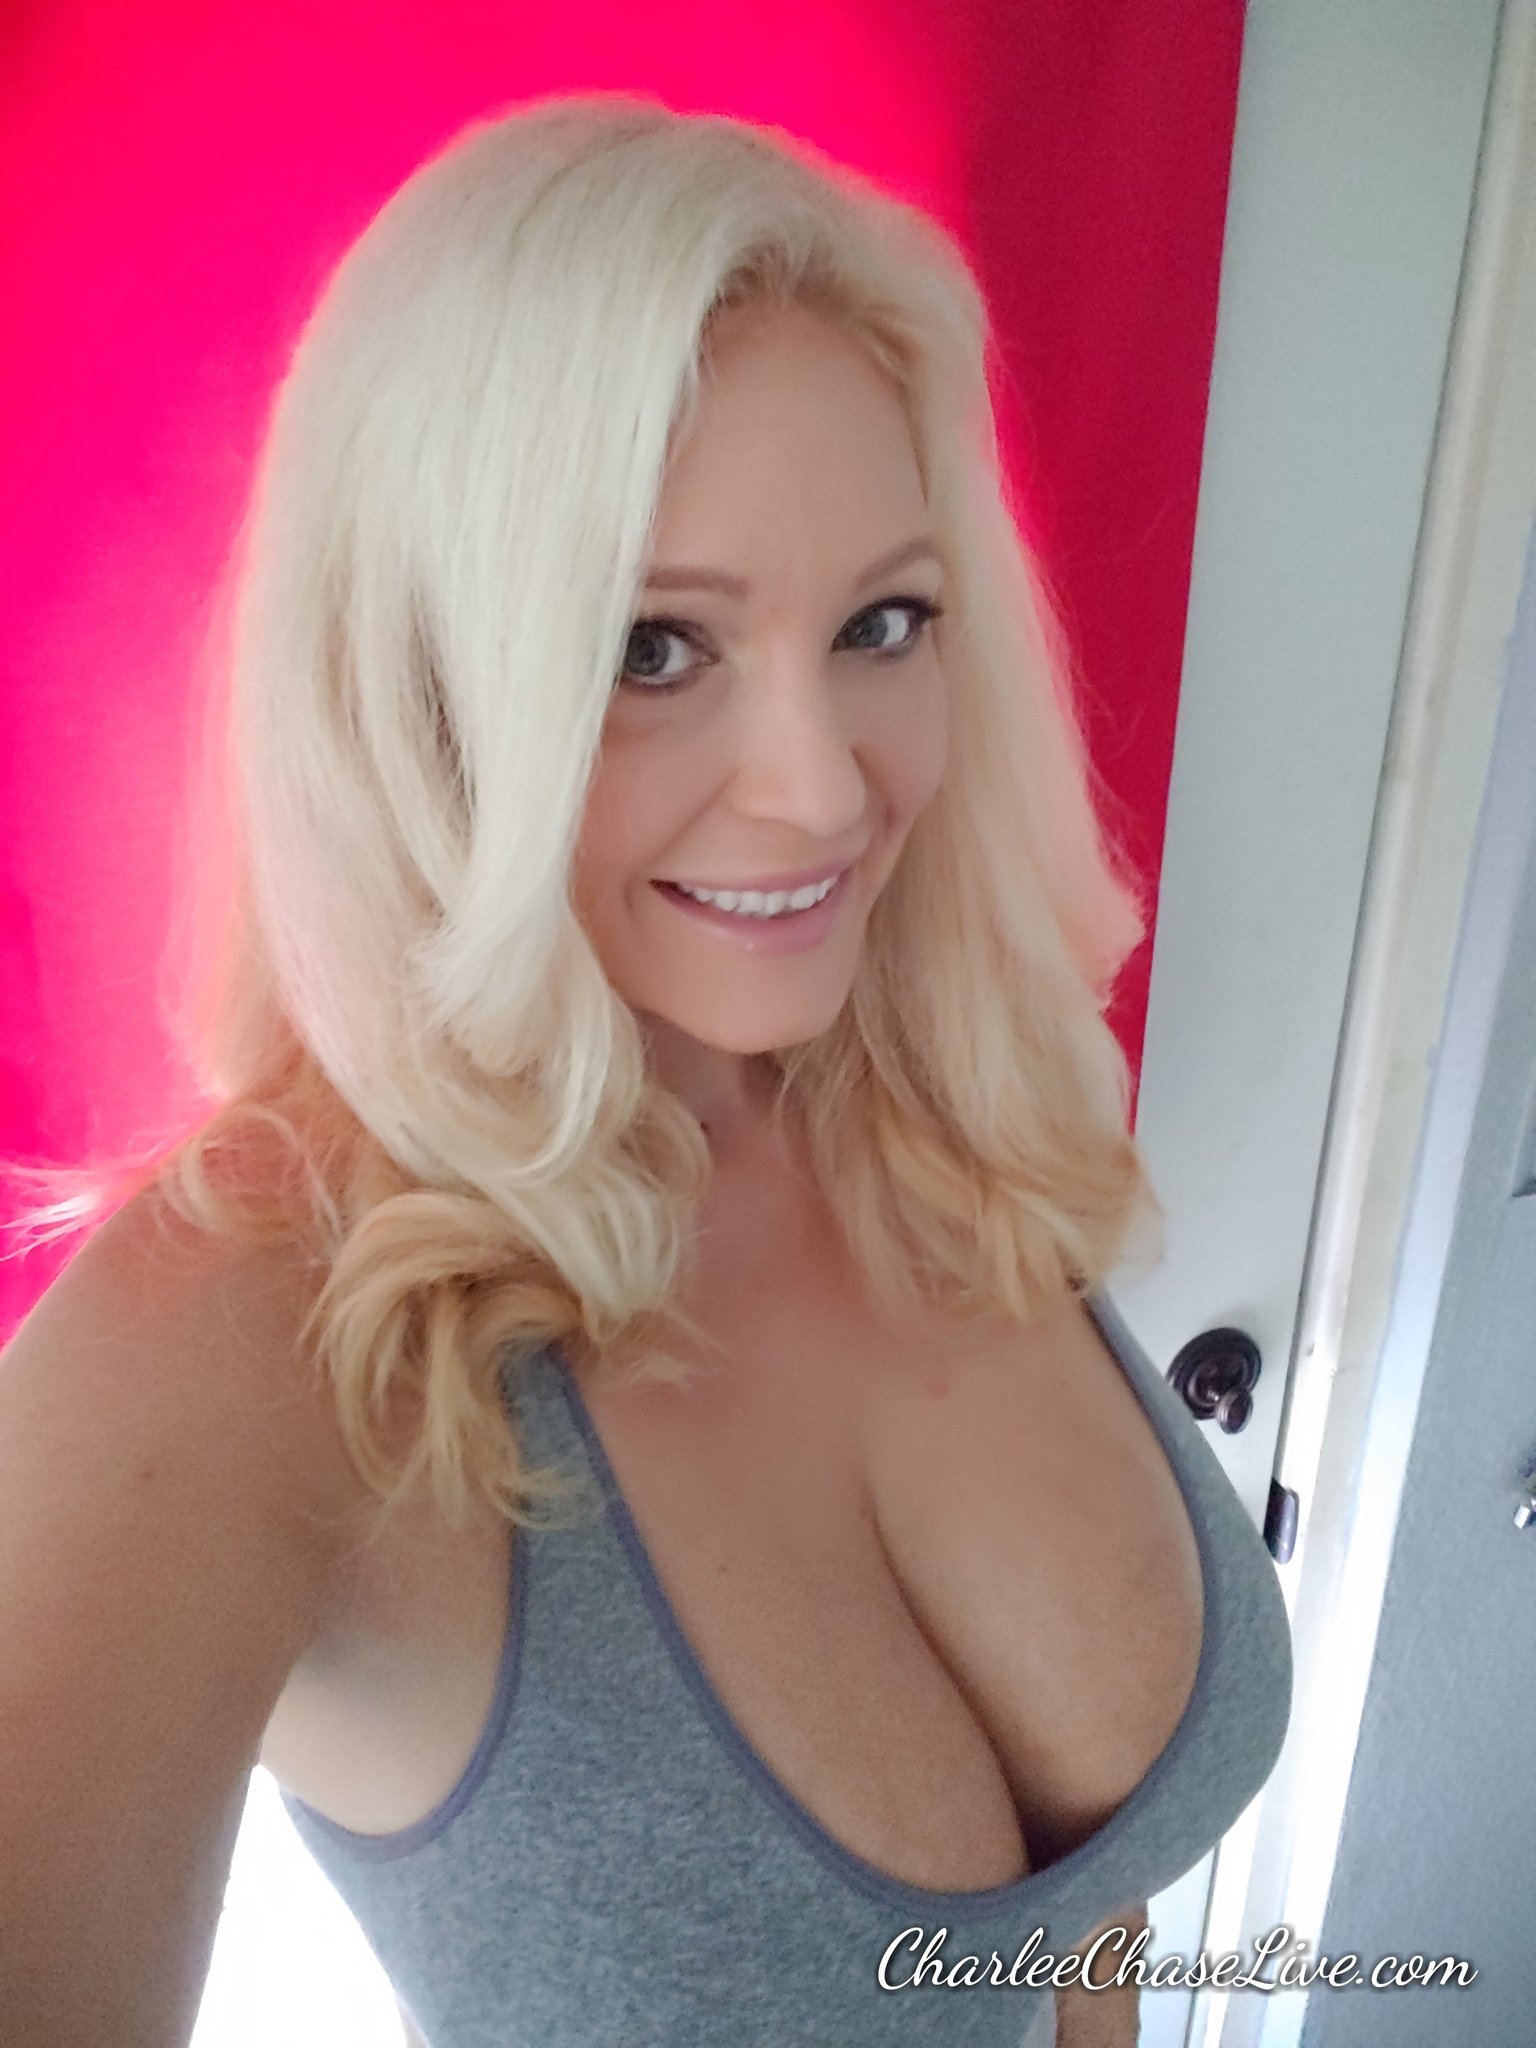 Charlee Chase ® ™ Top 2.5% OnlyFans lóri Twitter.